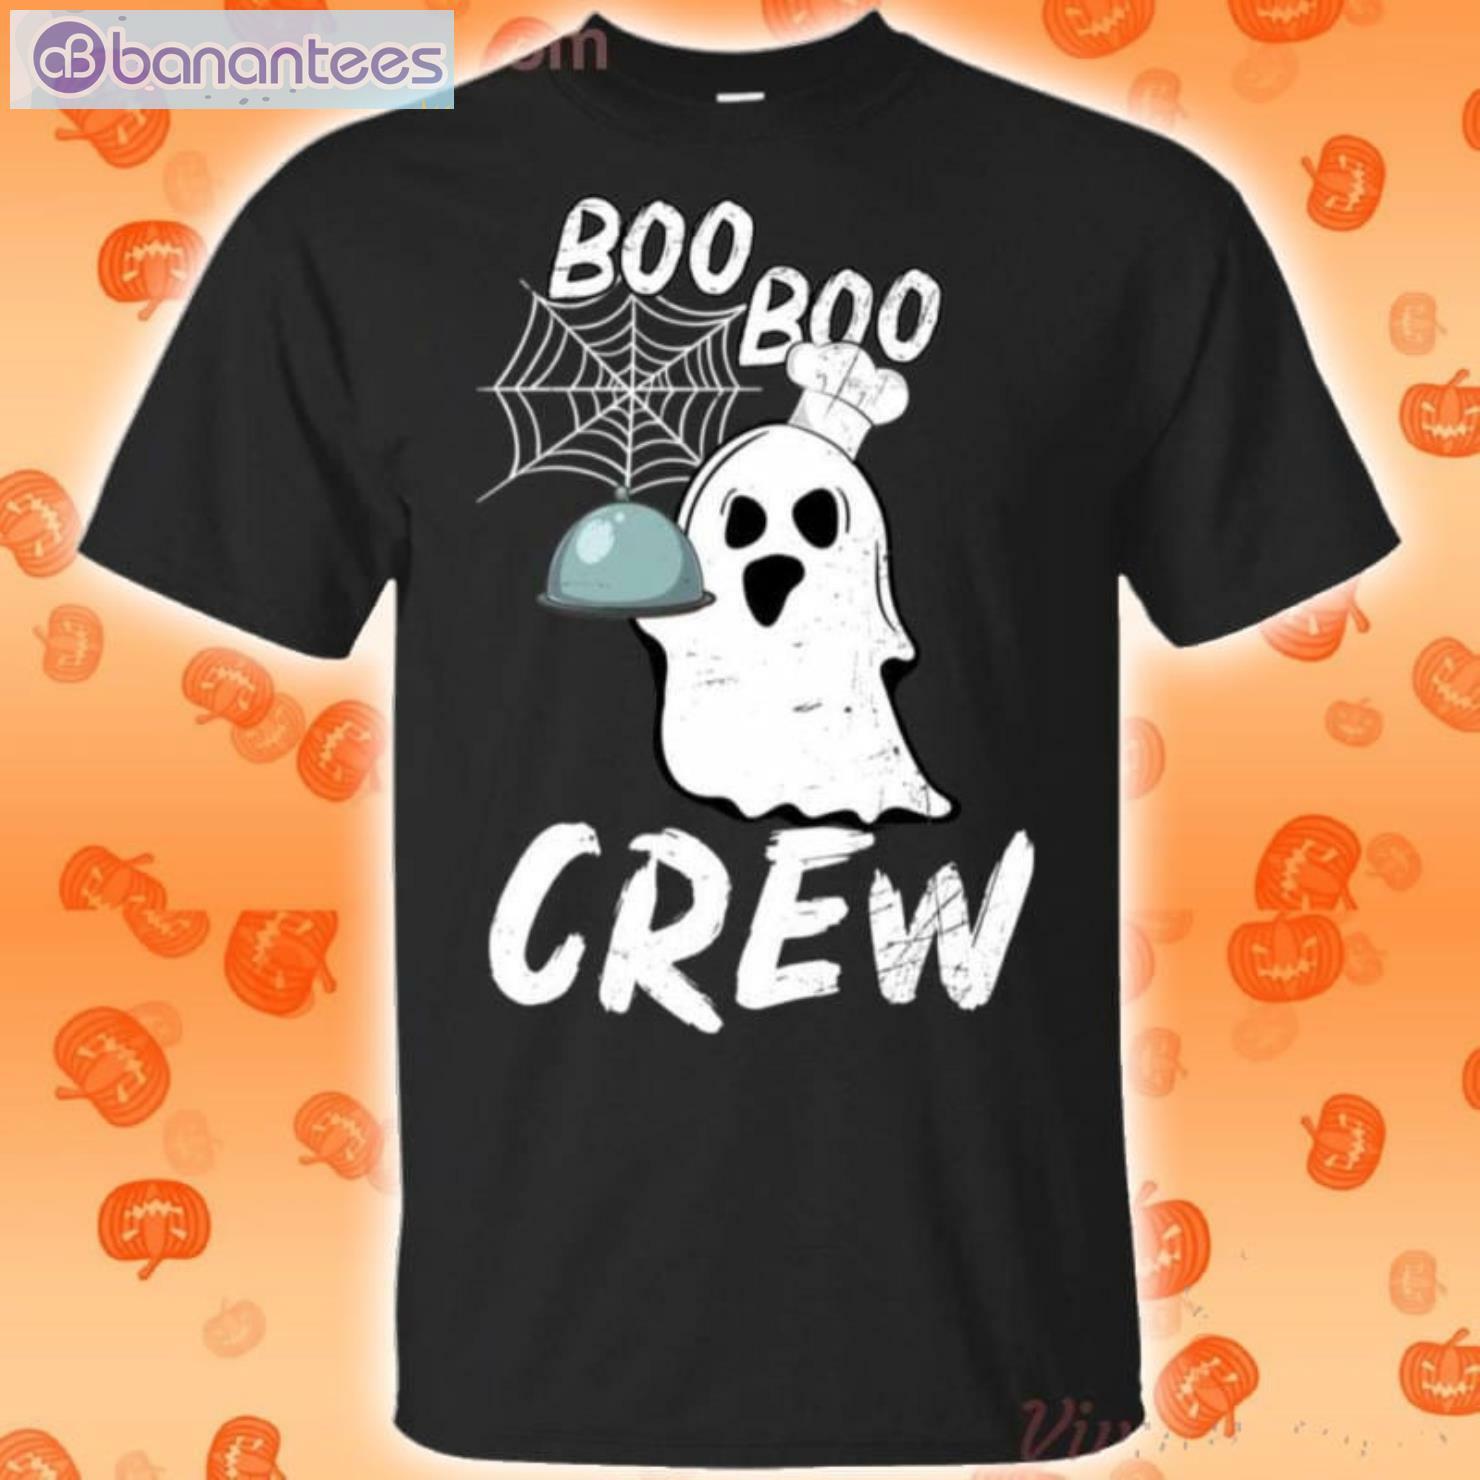 Cook Ghost Boo Boo Crew Halloween T-Shirt Product Photo 1 Product photo 1